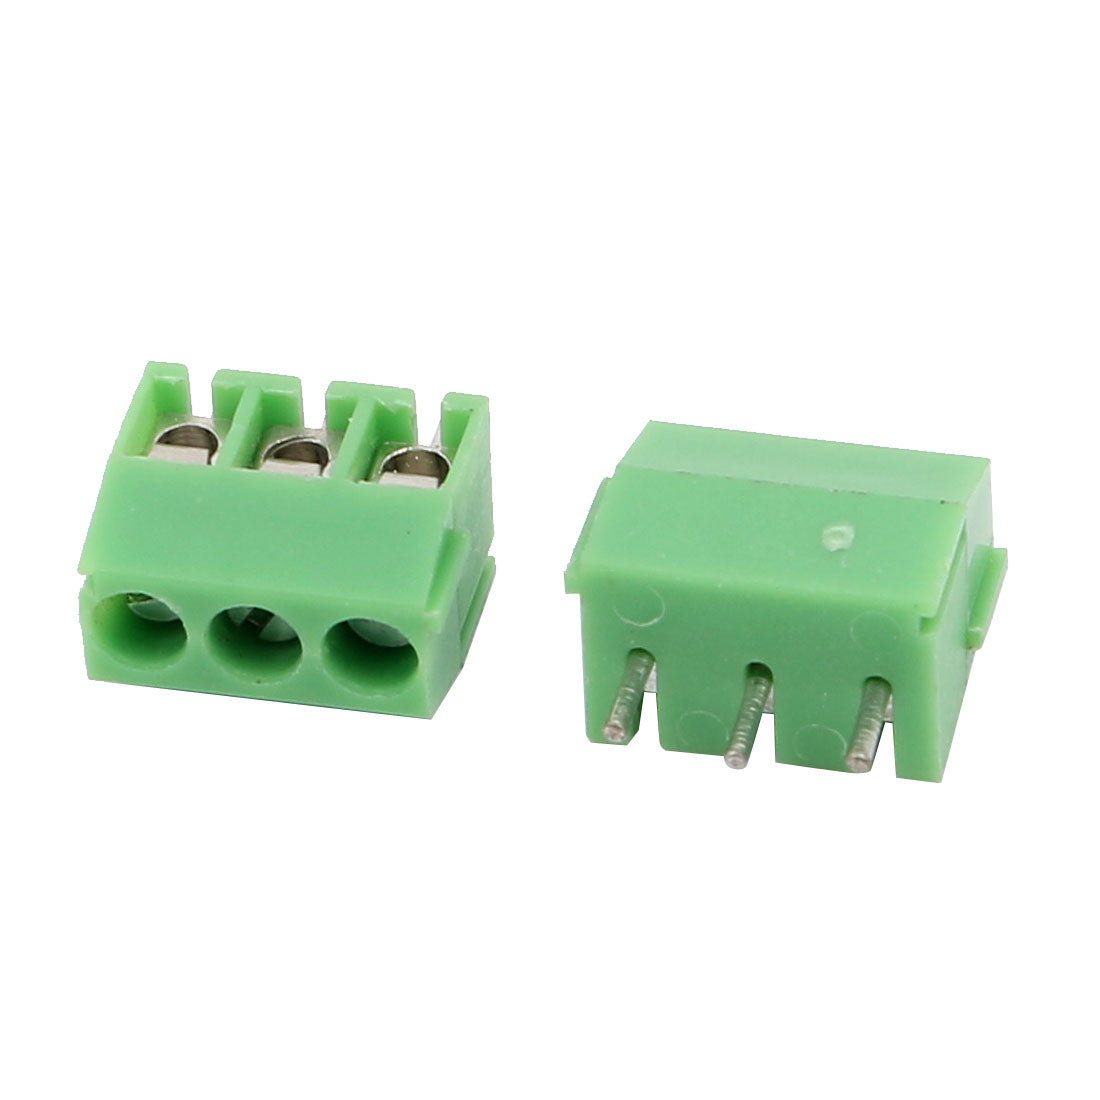 uxcell Uxcell 22Pcs AC 300V 10A 3.5mm Pitch 3P Terminal Block PCB Mount Wire Connection